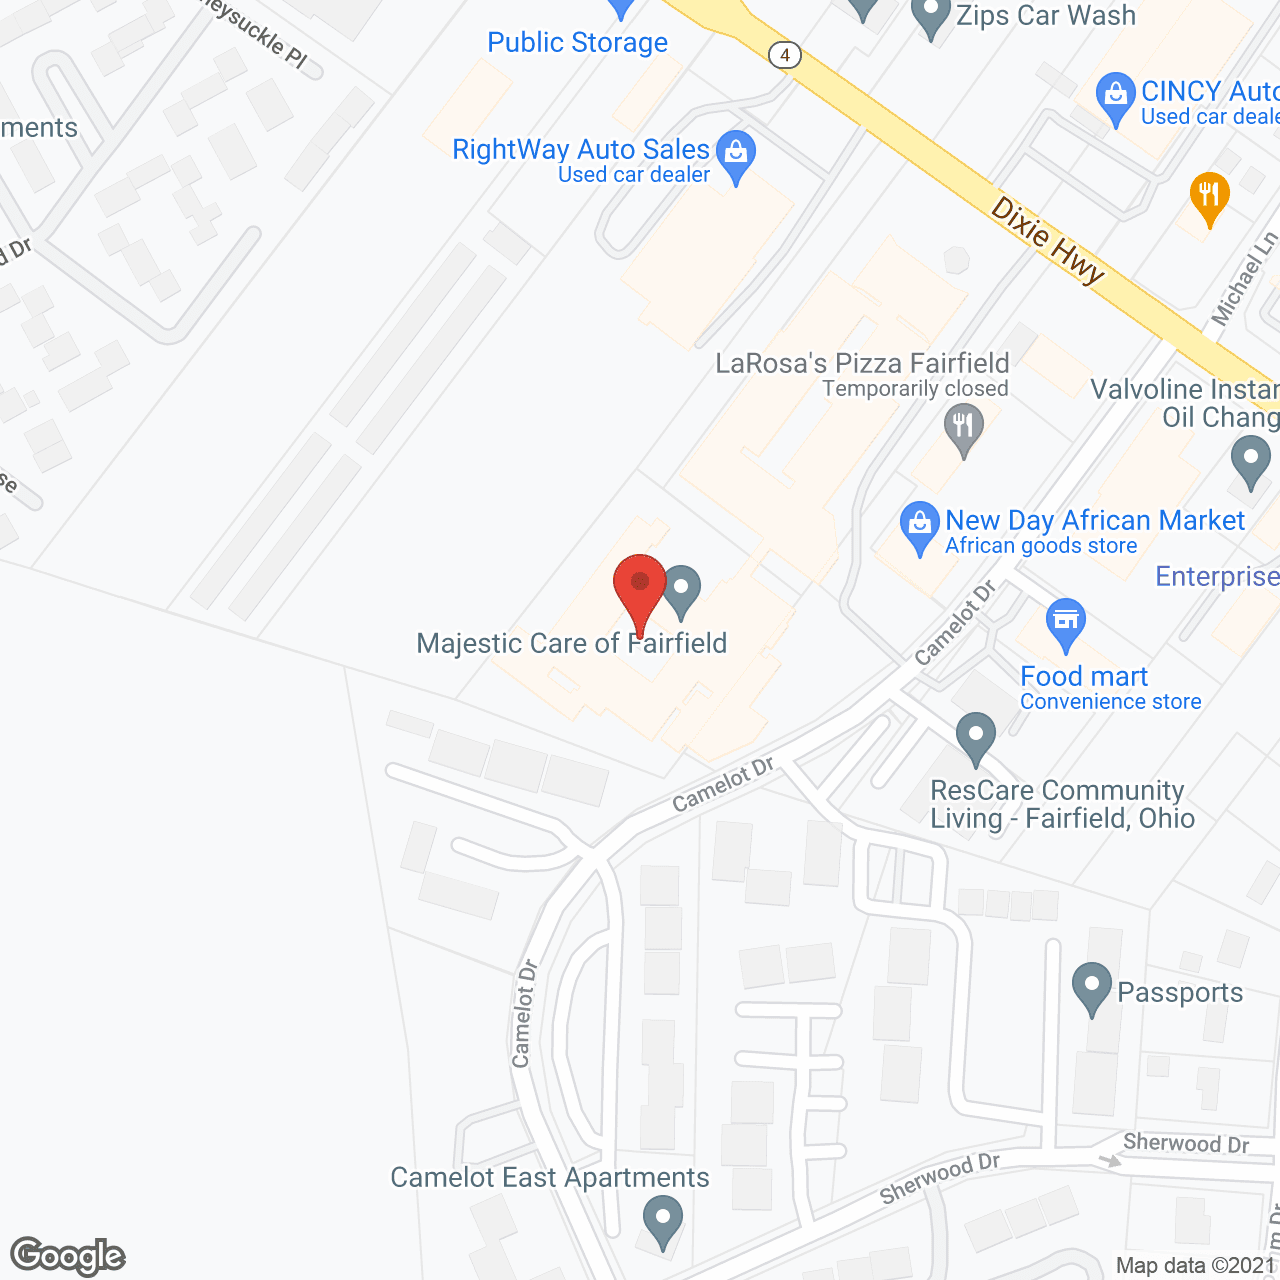 Tri-County Extended Care Center in google map